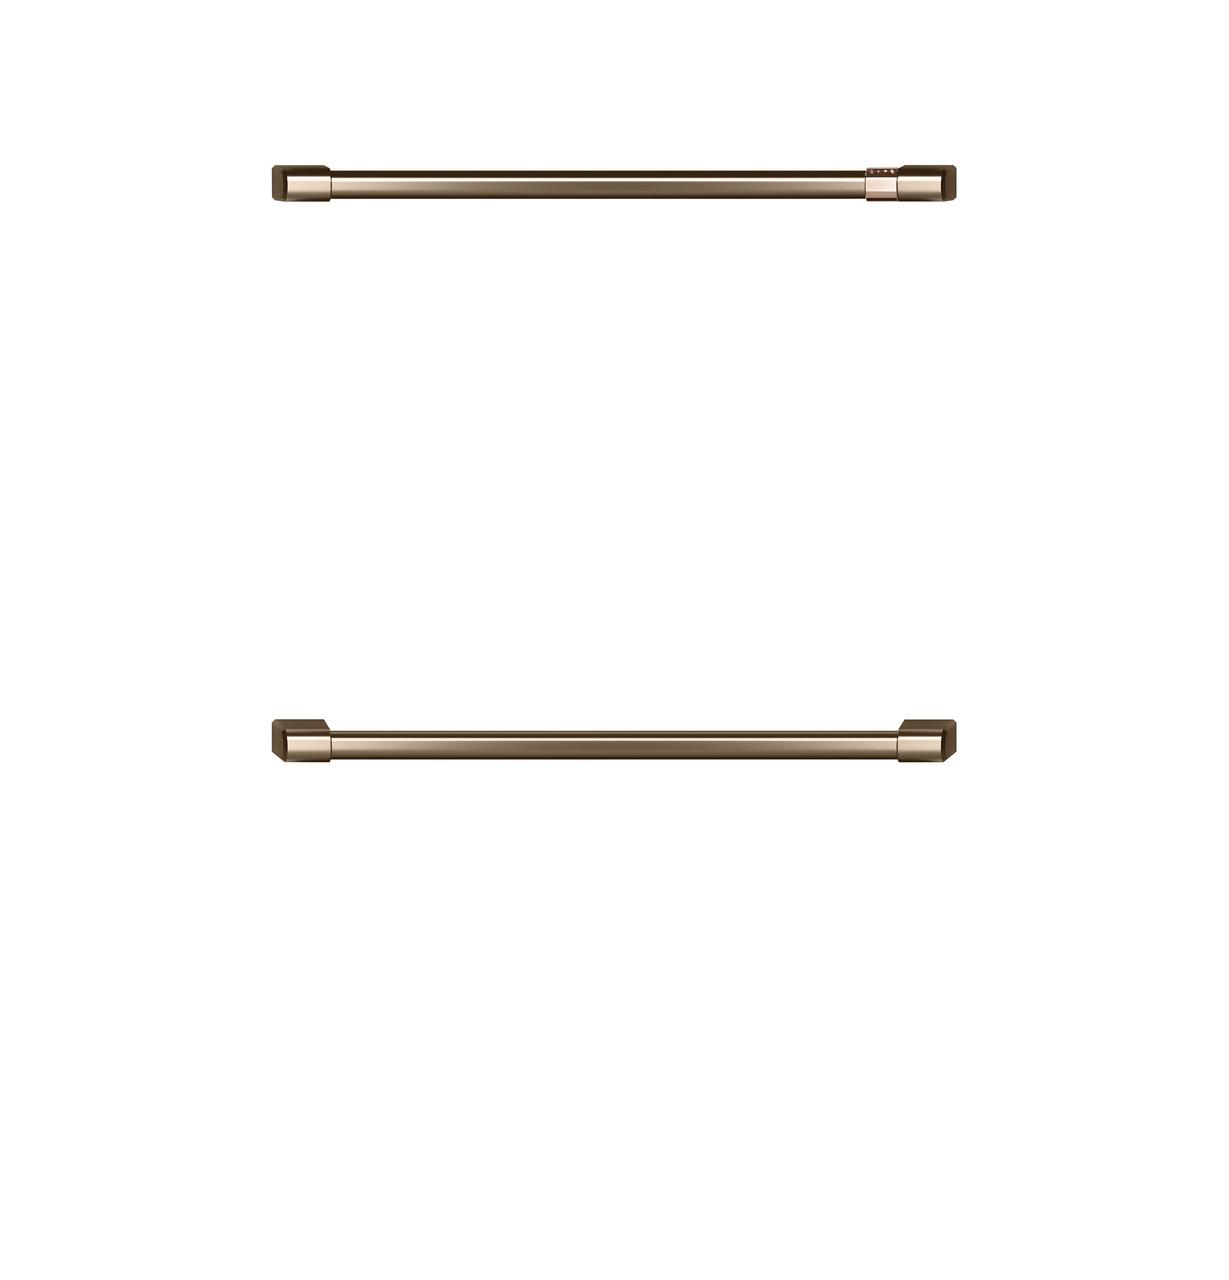 Cafe Caf(eback)™ 2 - 30" Double Wall Oven Handles - Brushed Bronze